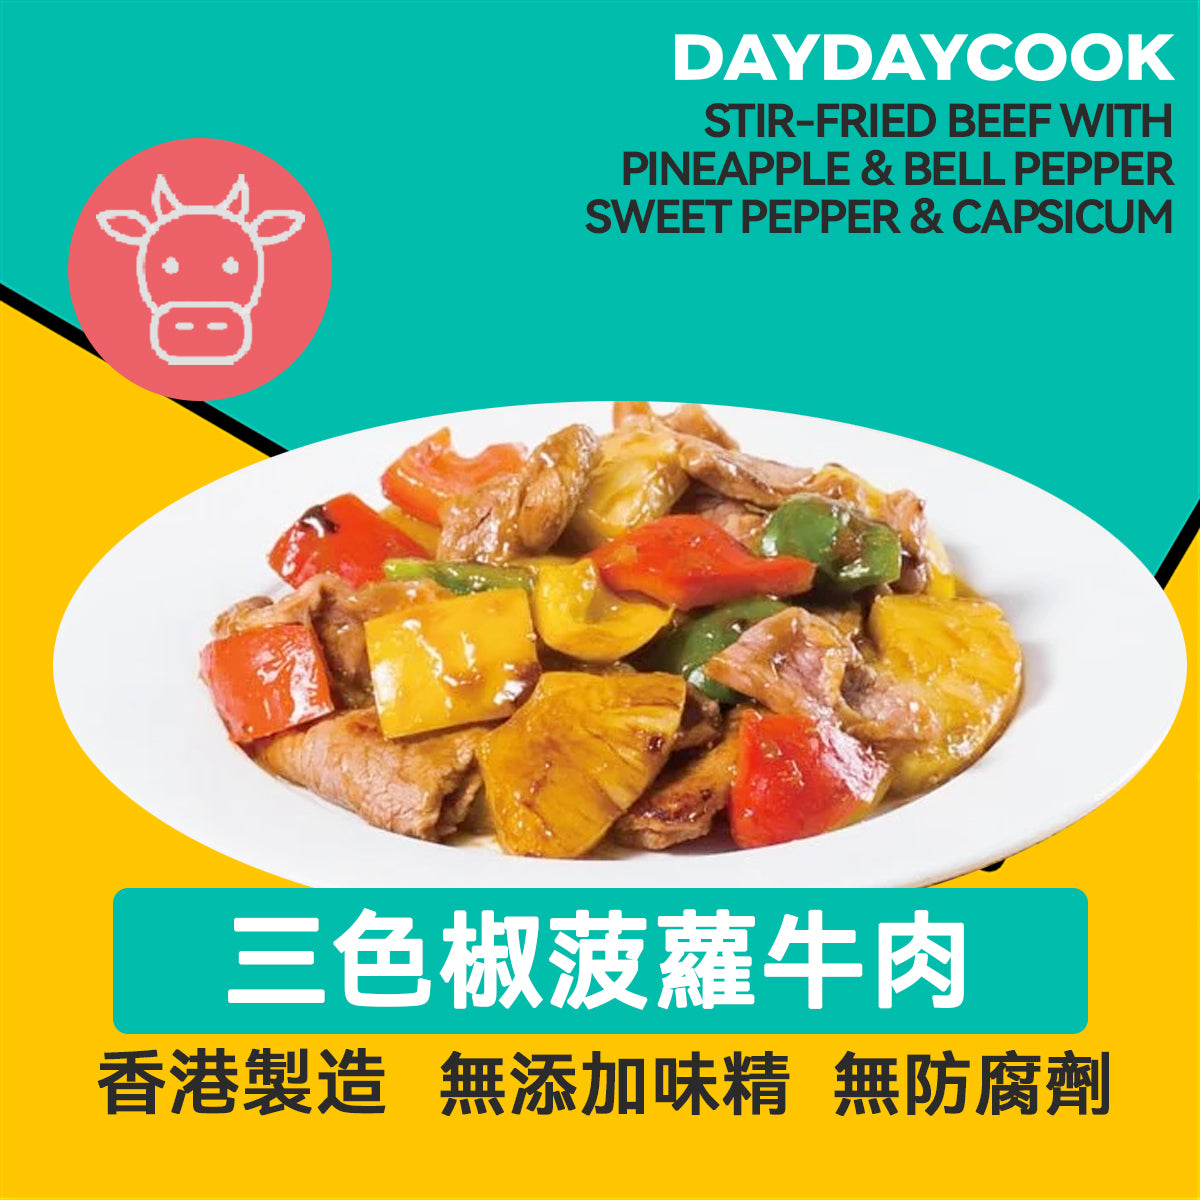 Stir-fried Beef with Pineapple and Bell Pepper, Sweet Pepper and Capsicum